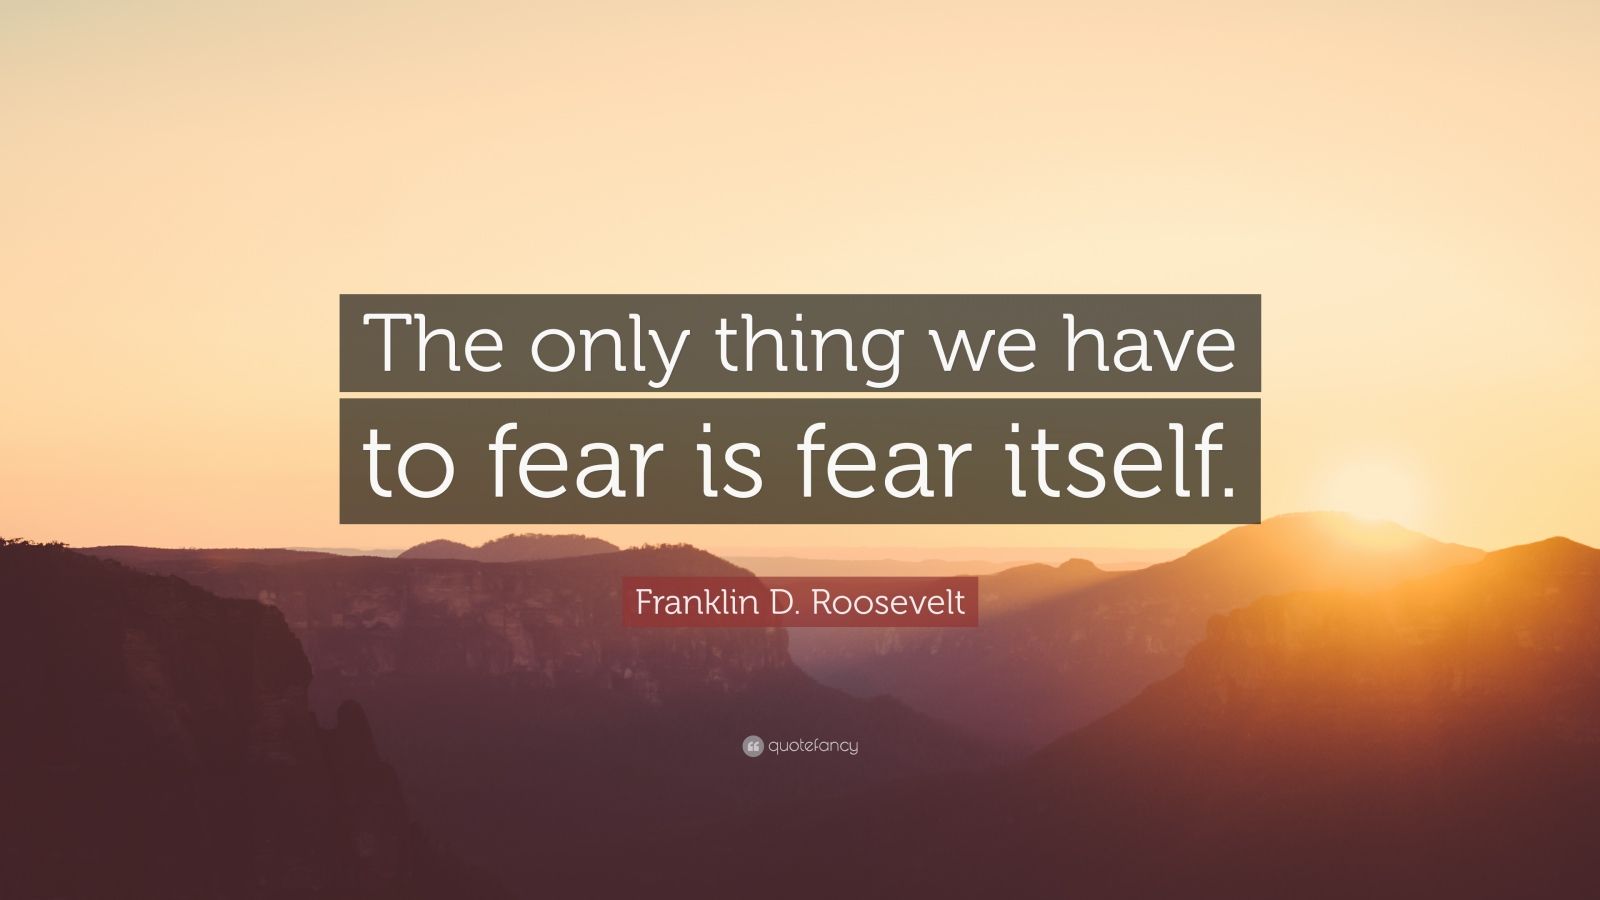 Franklin D. Roosevelt Quote: “The only thing we have to fear is fear ...